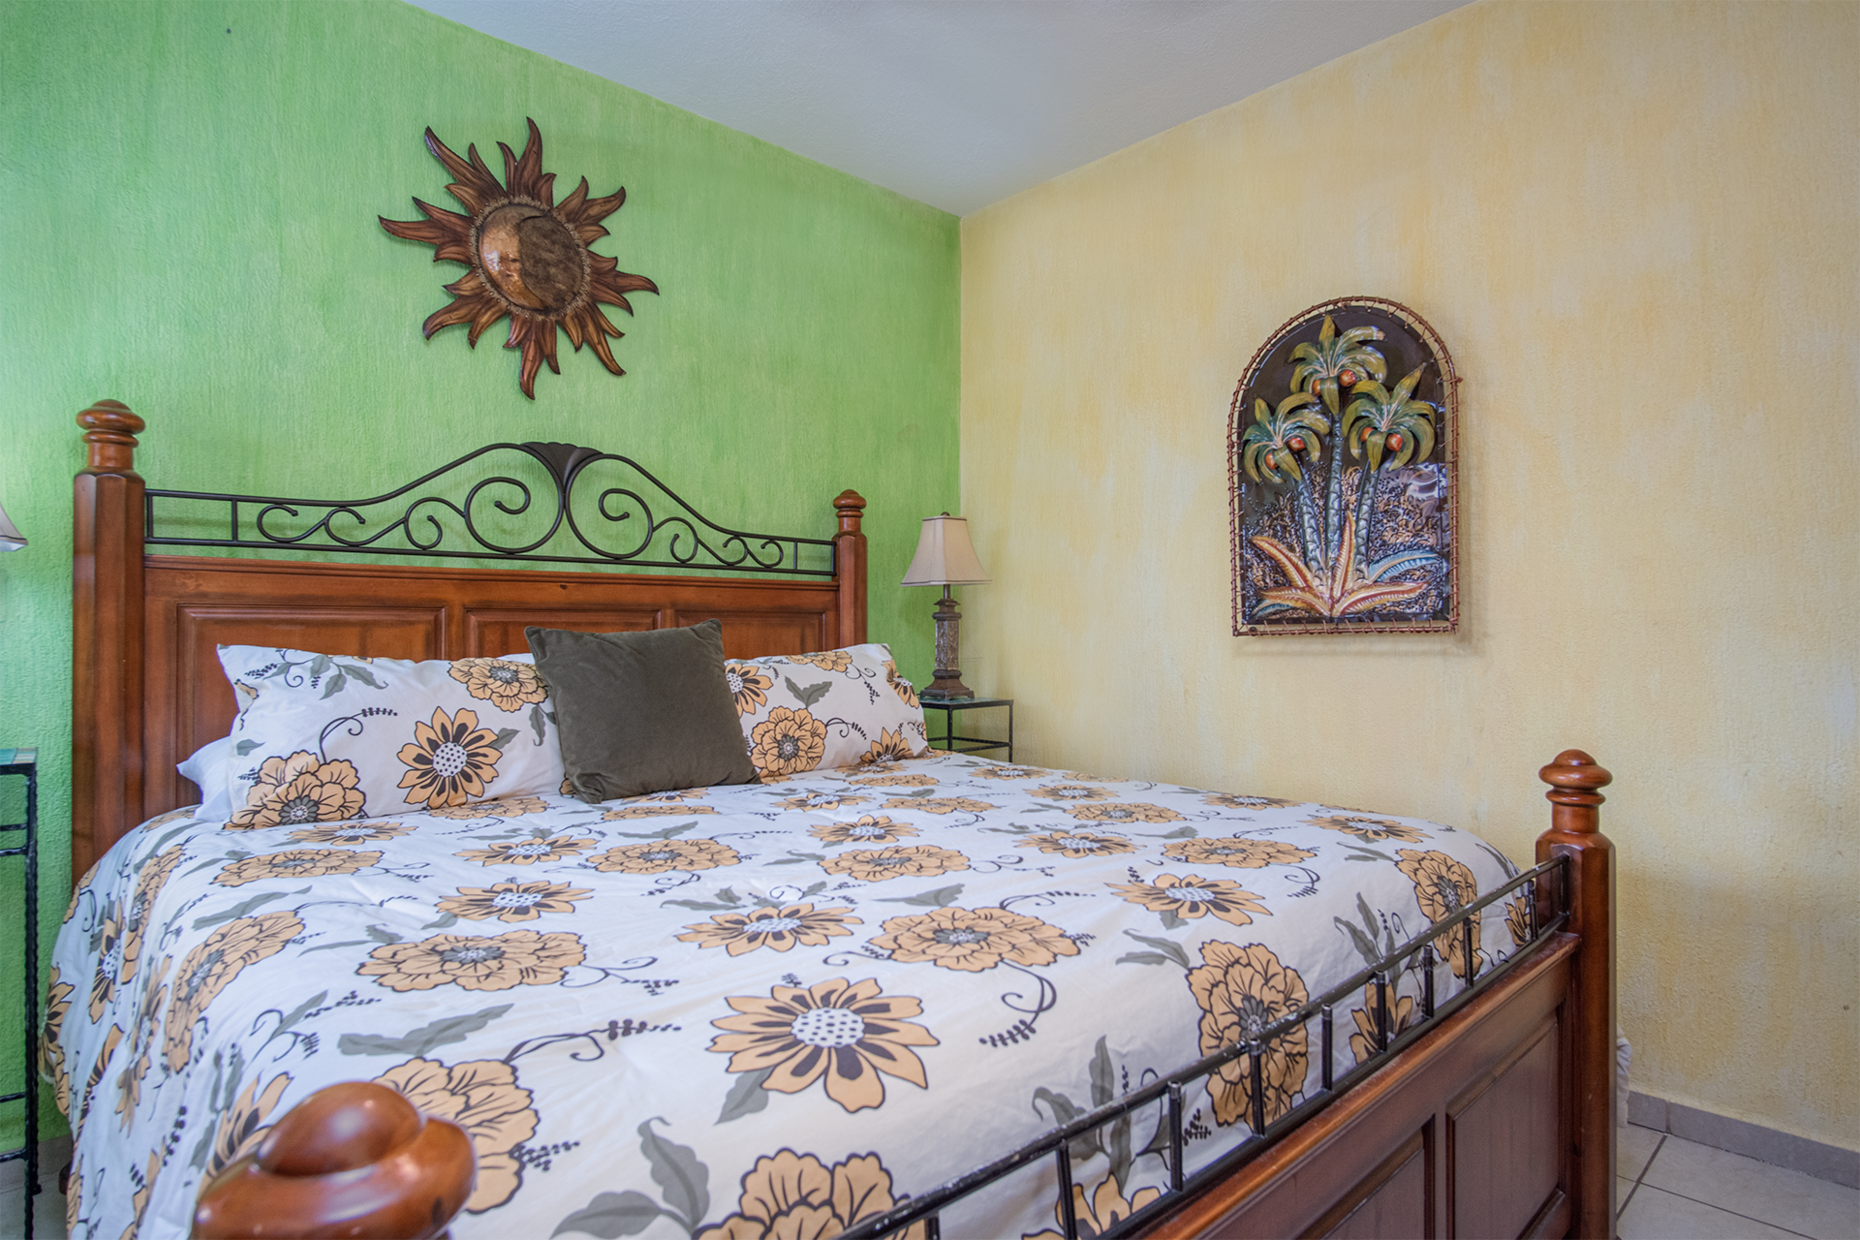 King bed in the colorful guest bedroom